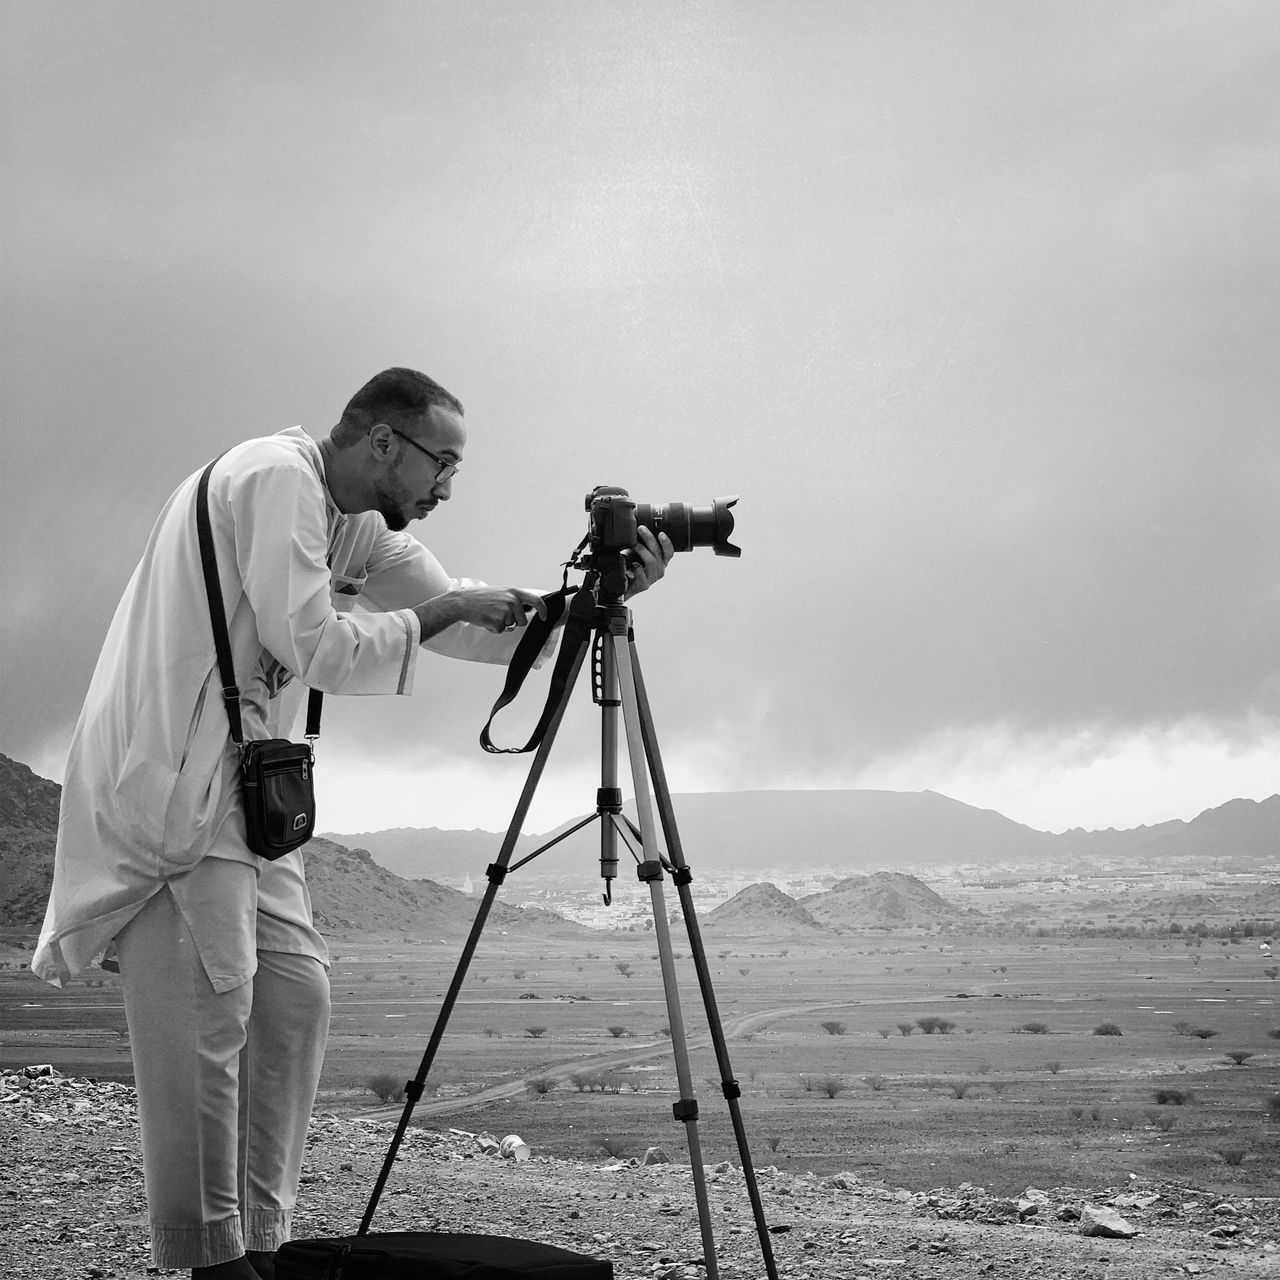 MAN PHOTOGRAPHING ON CAMERA